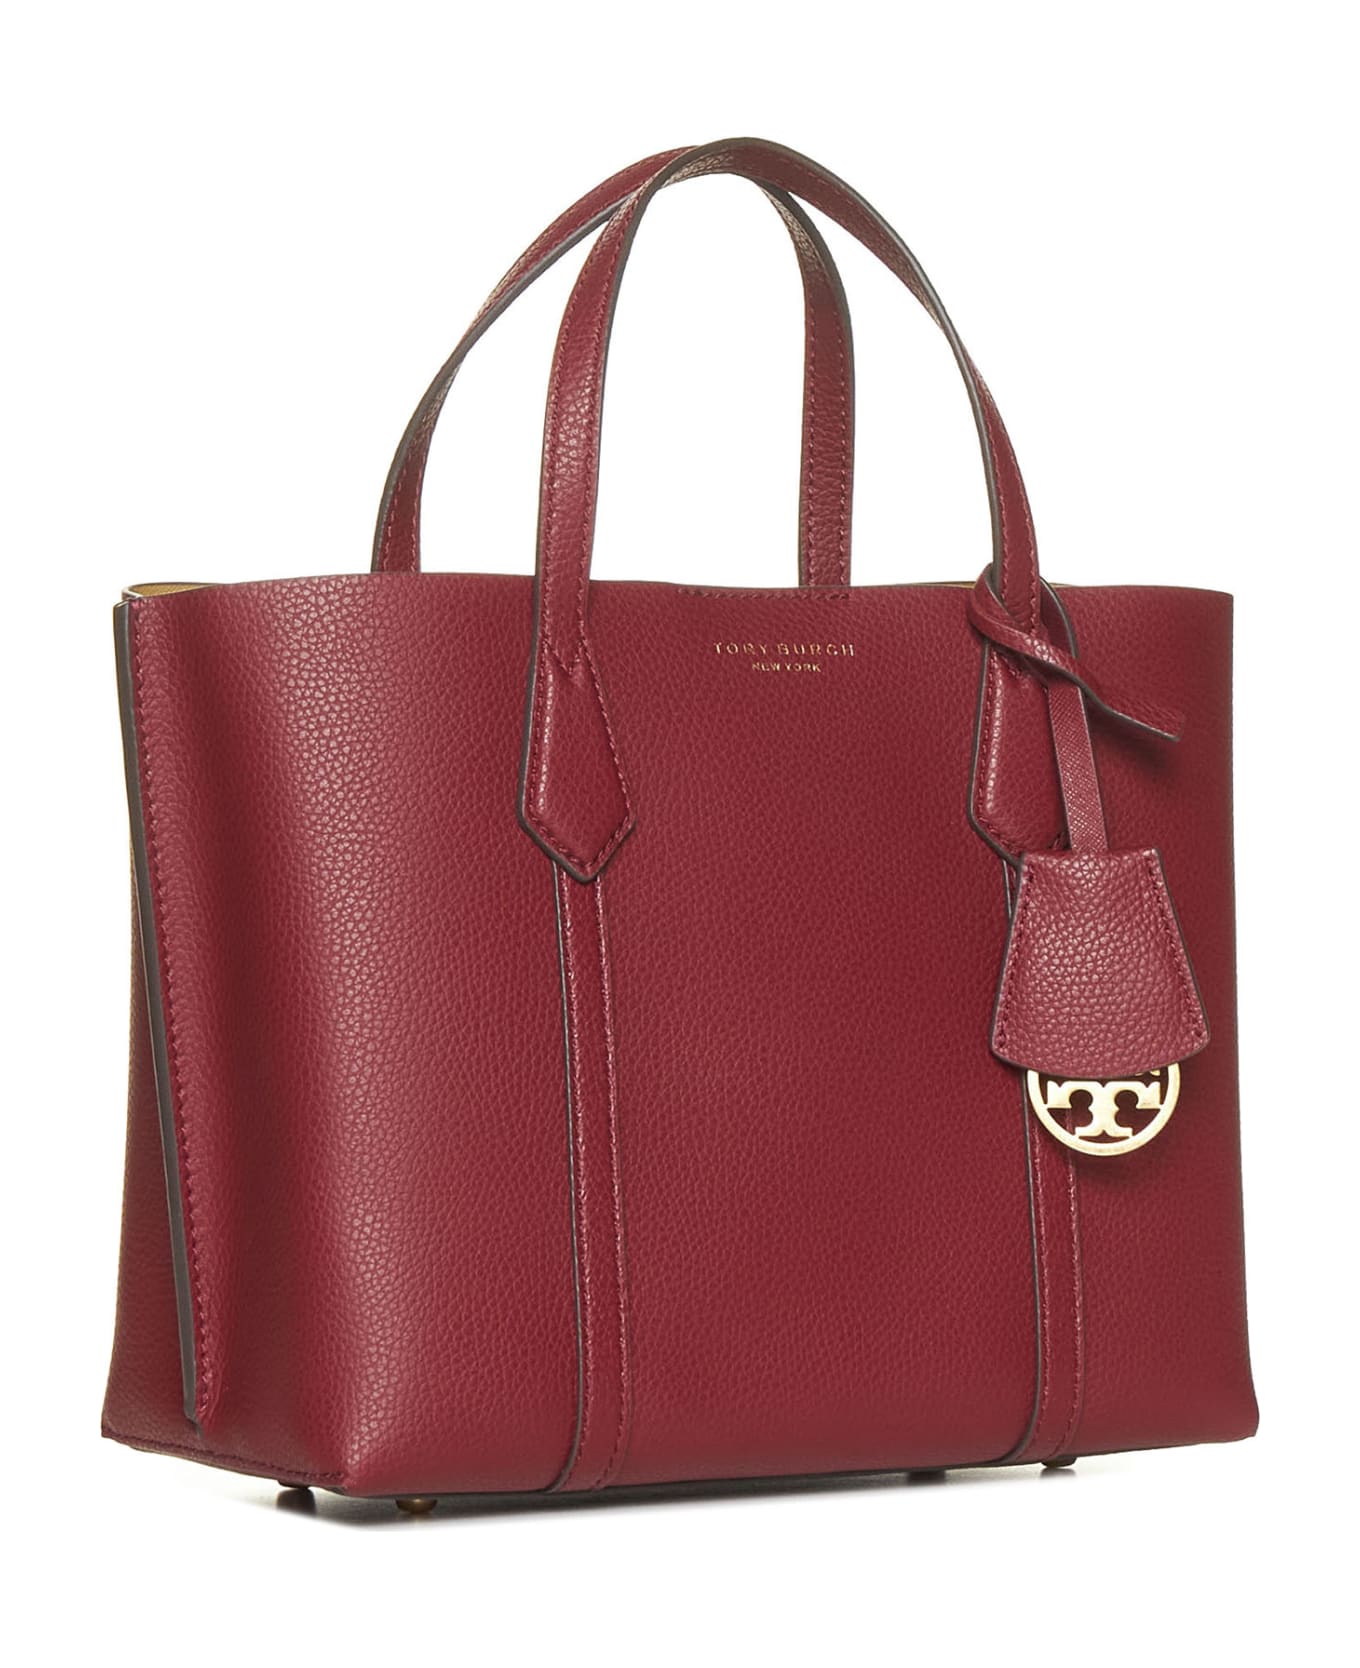 Tory Burch Perry Small Triple Compartment Tote - red トートバッグ